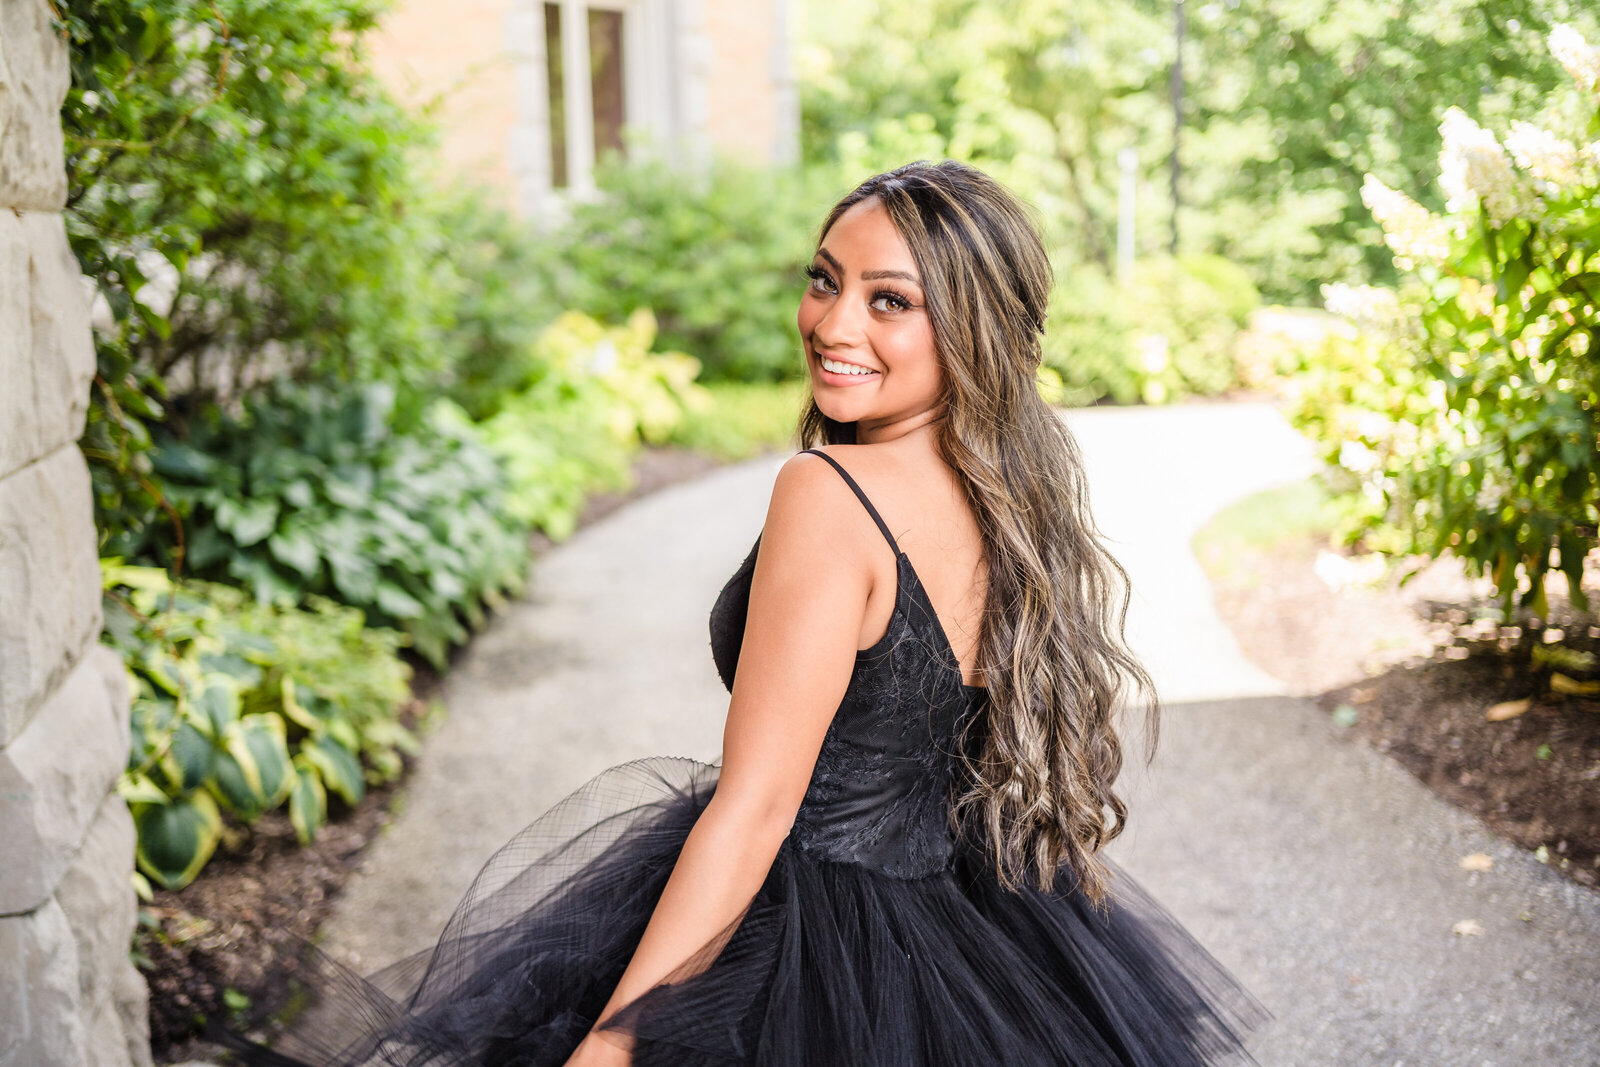 A bride in a black dress runs along a garden path and looks back at the camera smiling